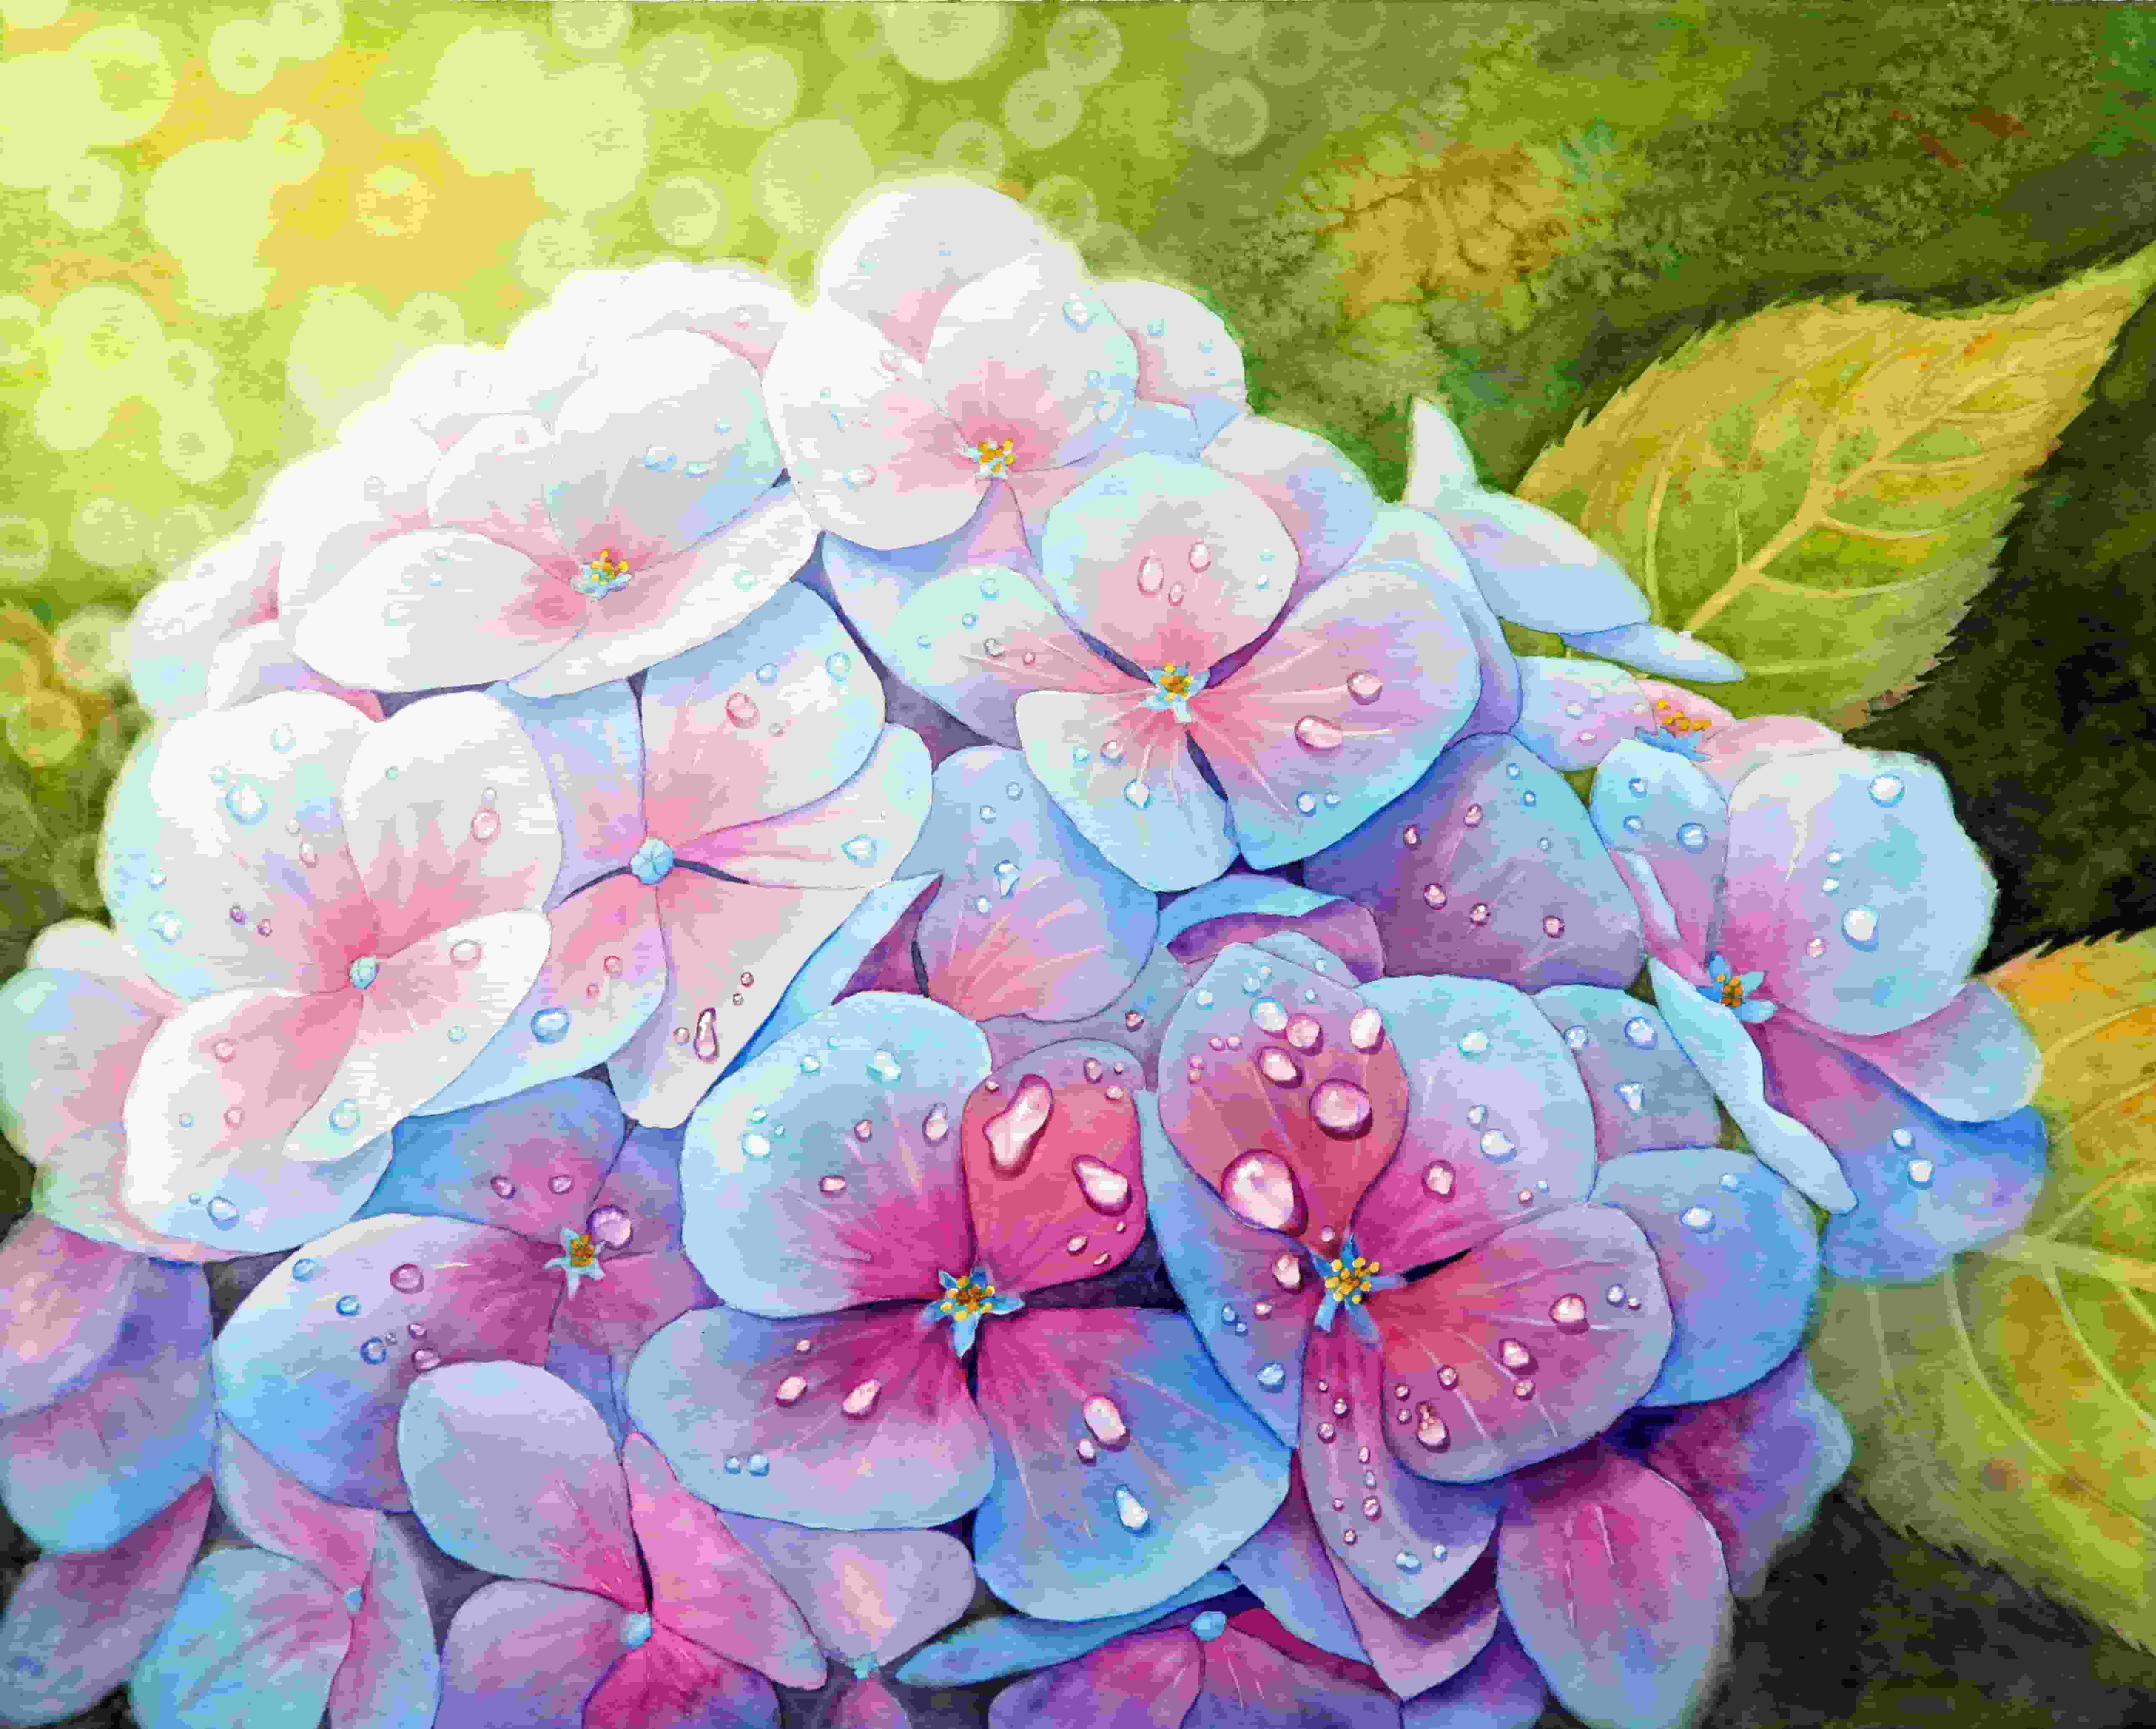 View more about Beth Owen Watercolors